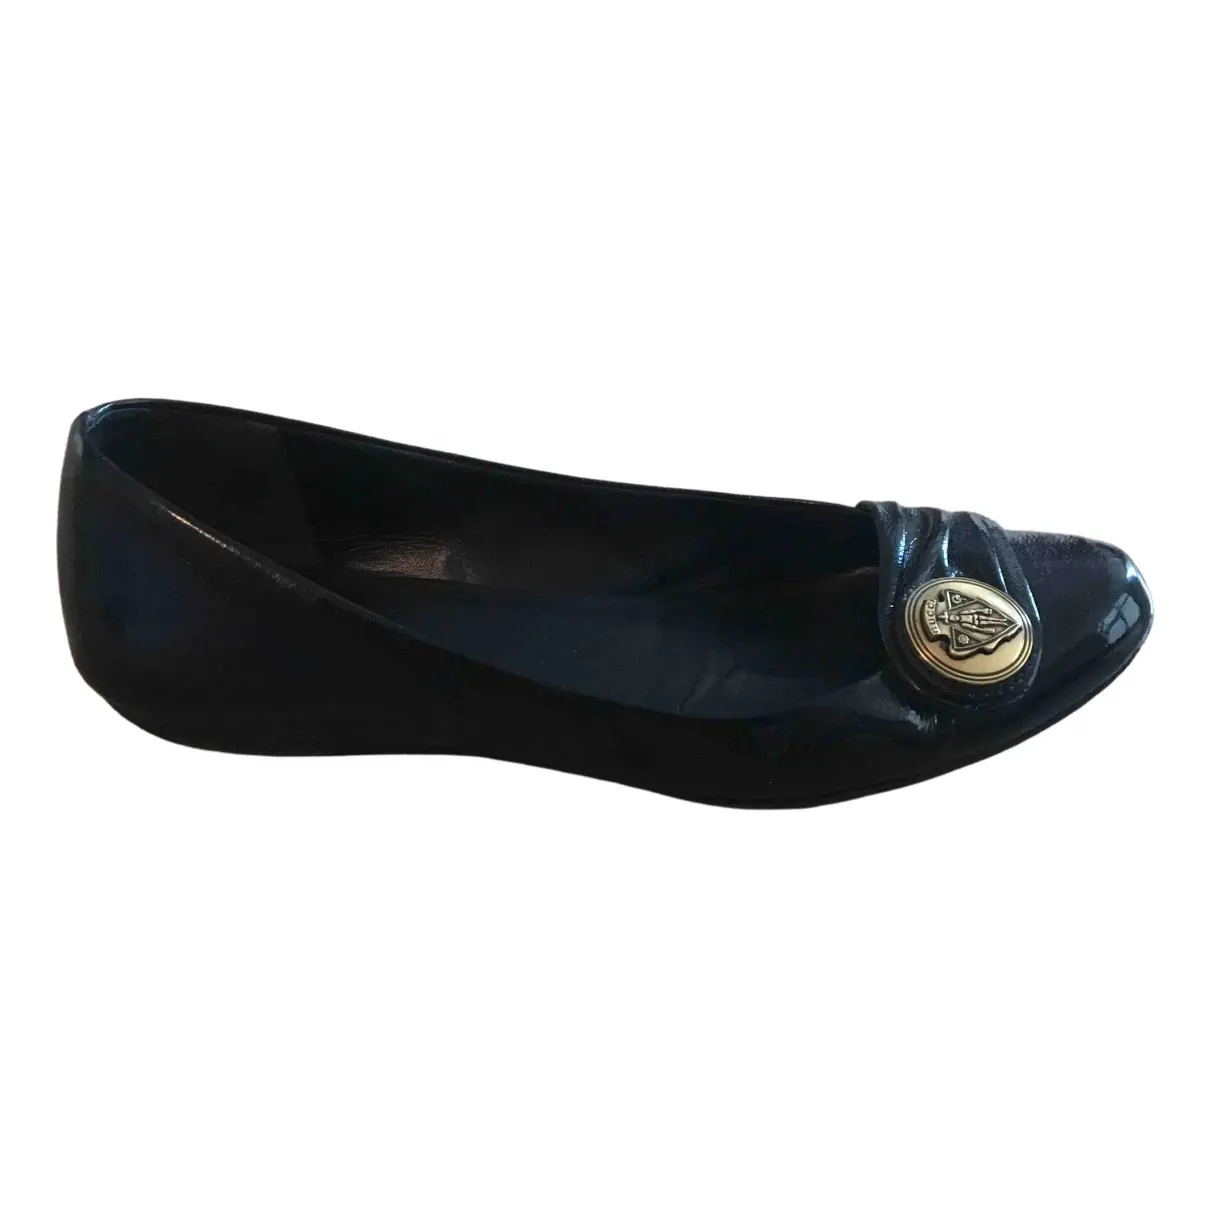 Patent leather ballet flats Gucci